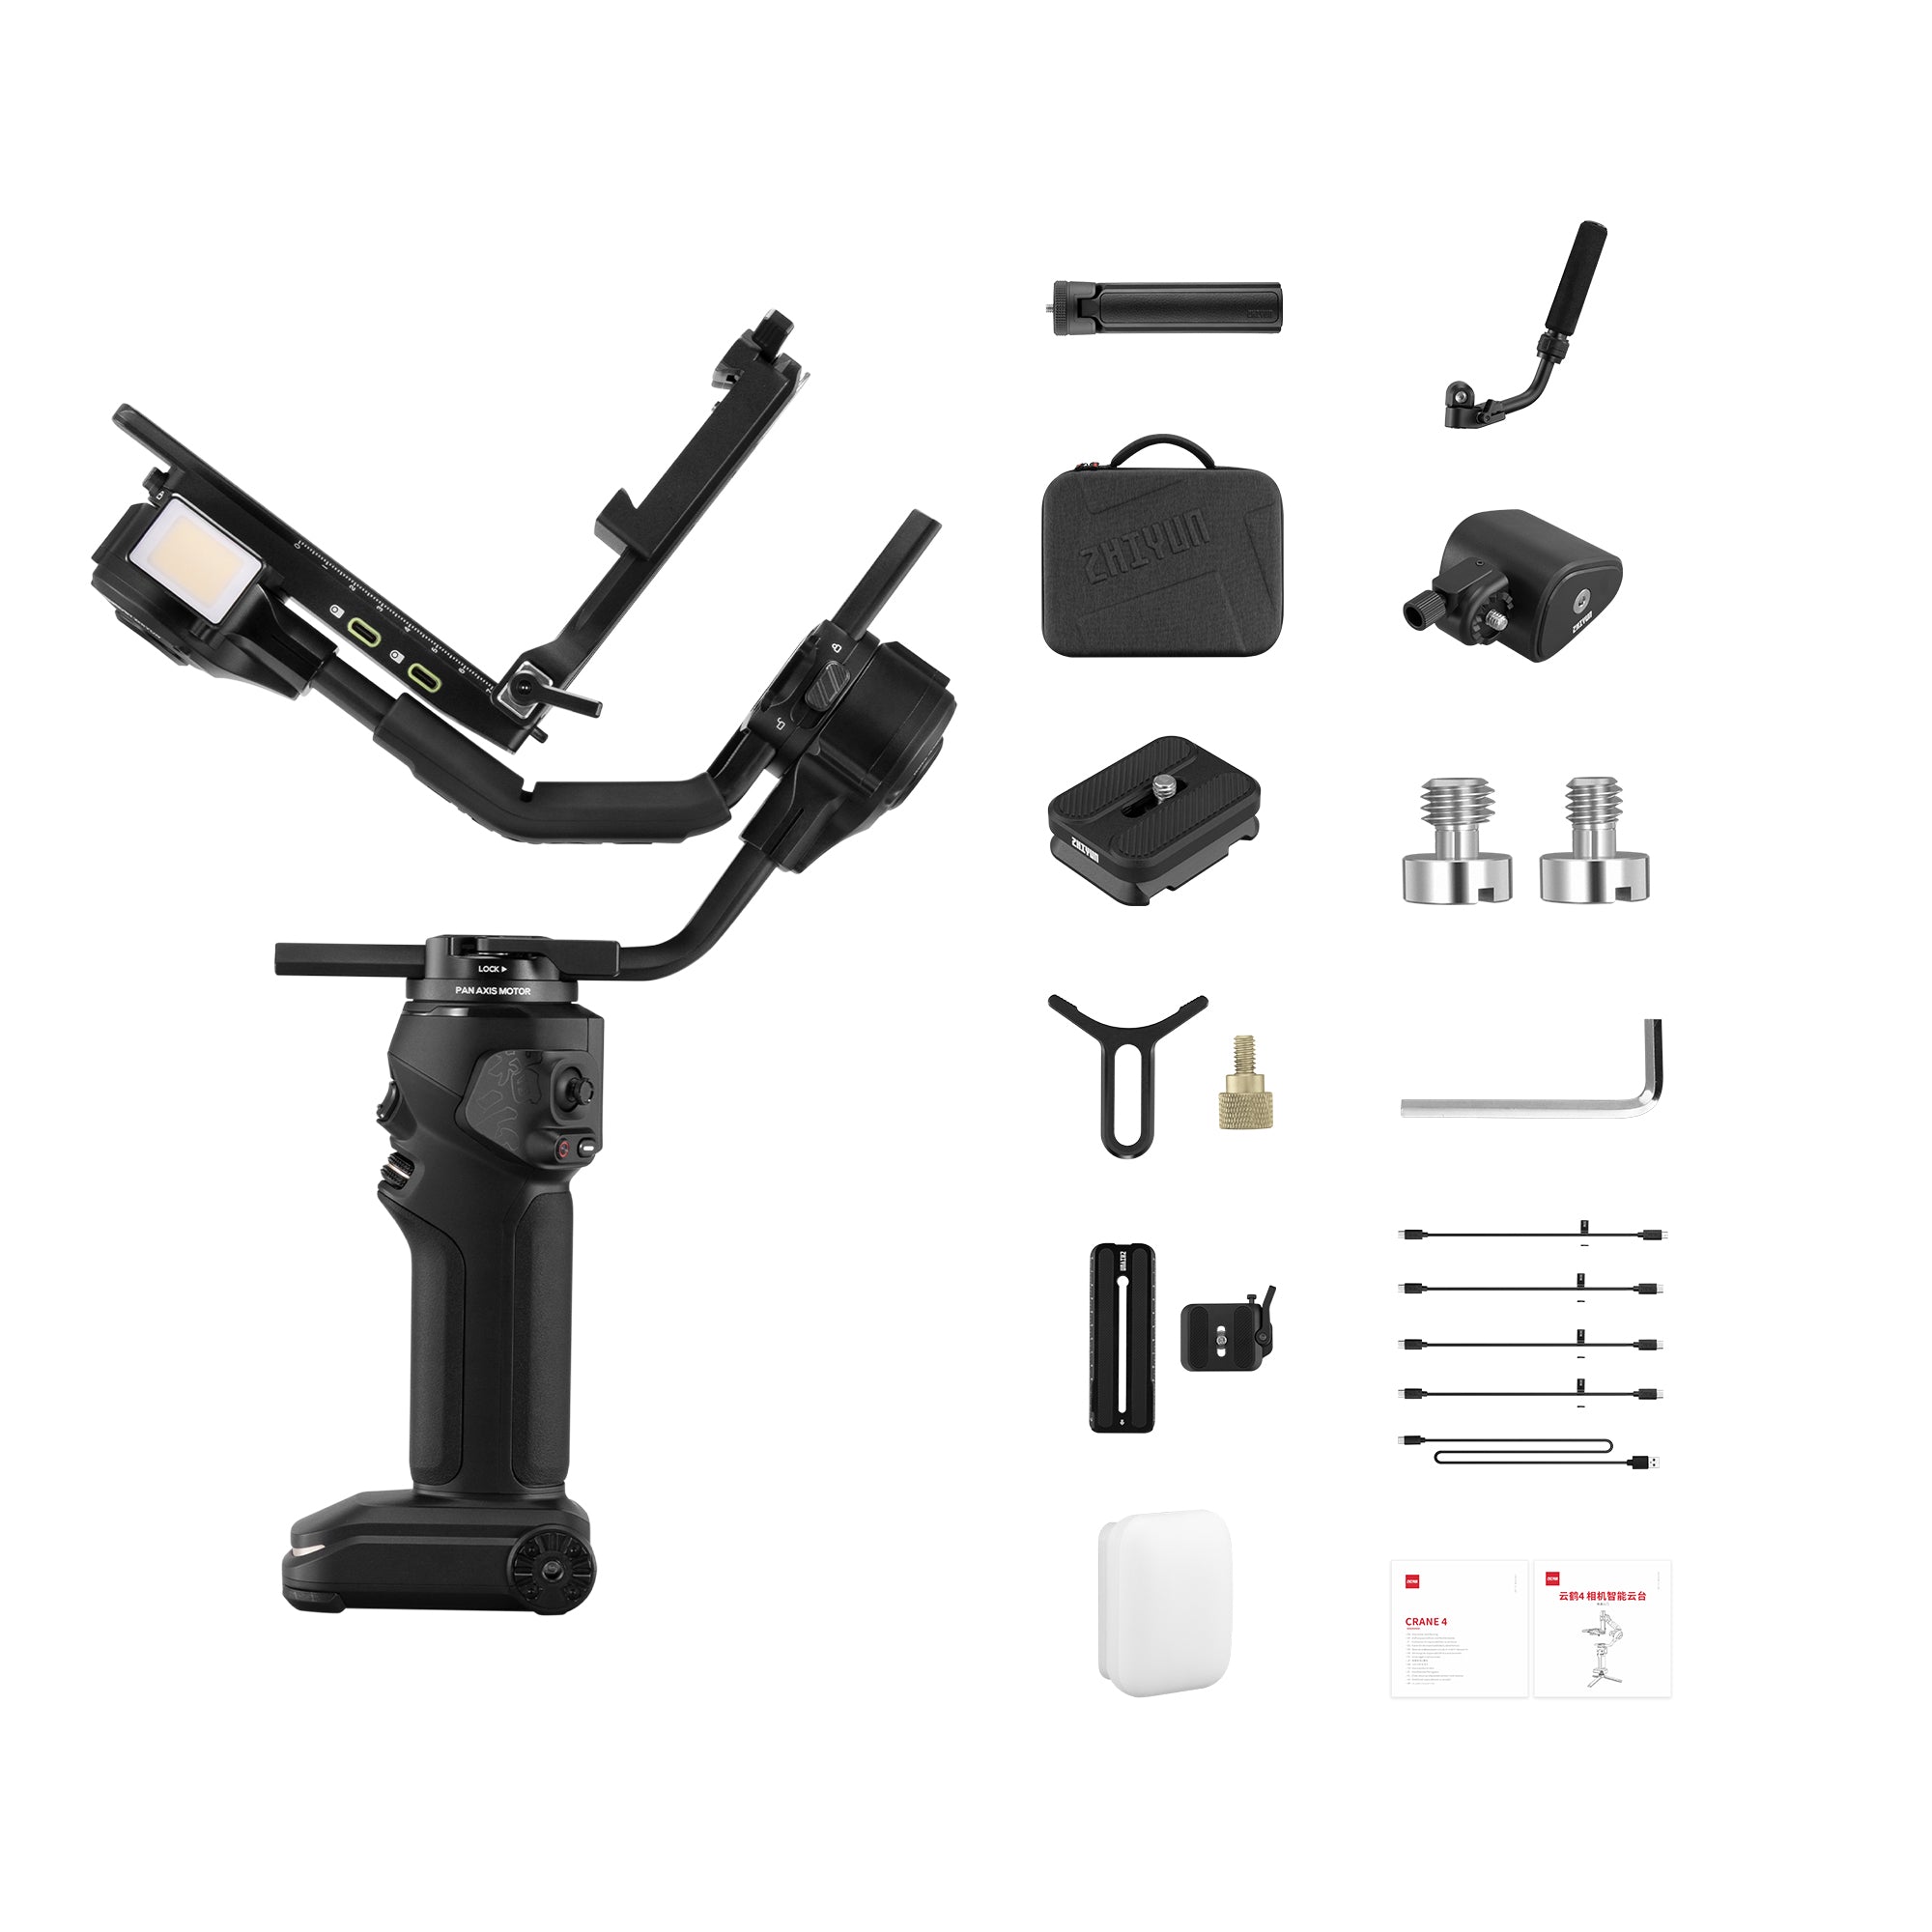 Crane 4 - 3-Axis Camera Gimbal for full-frame DSLR and compact 